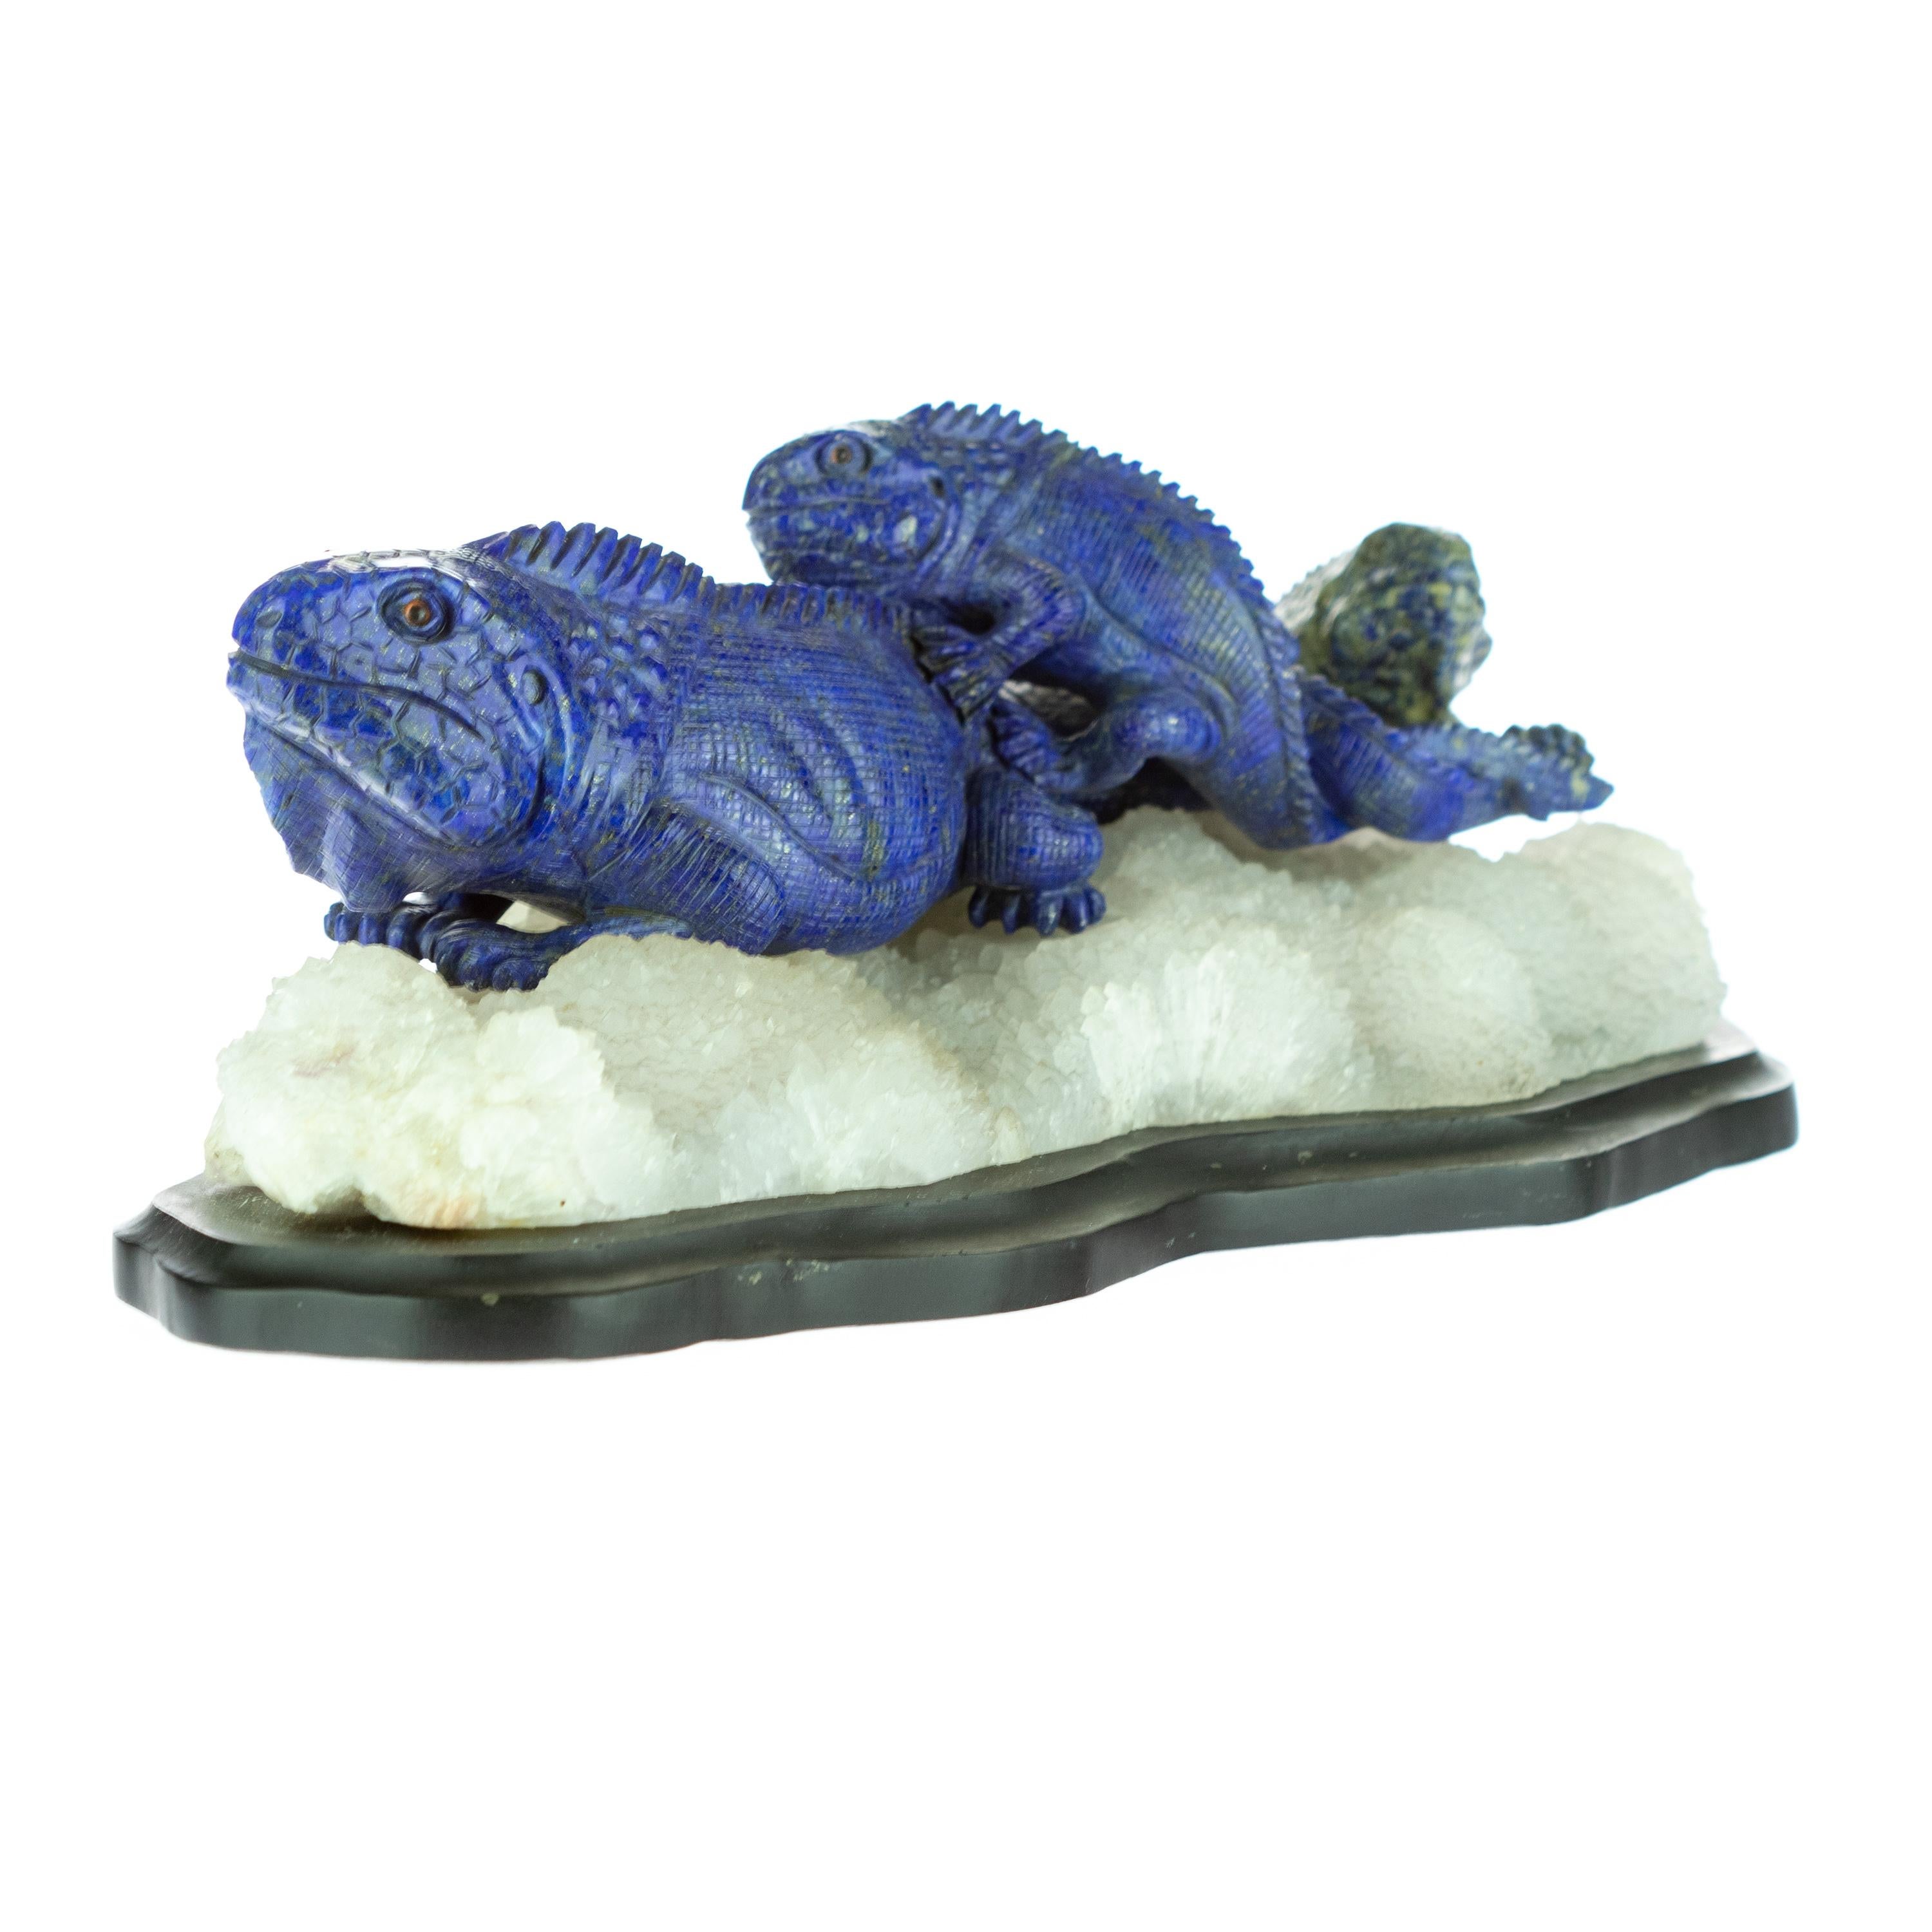 Chinese Export Lapis Lazuli Blue Lizards Figurine Carved Animal Artisanal Statue Sculpture For Sale